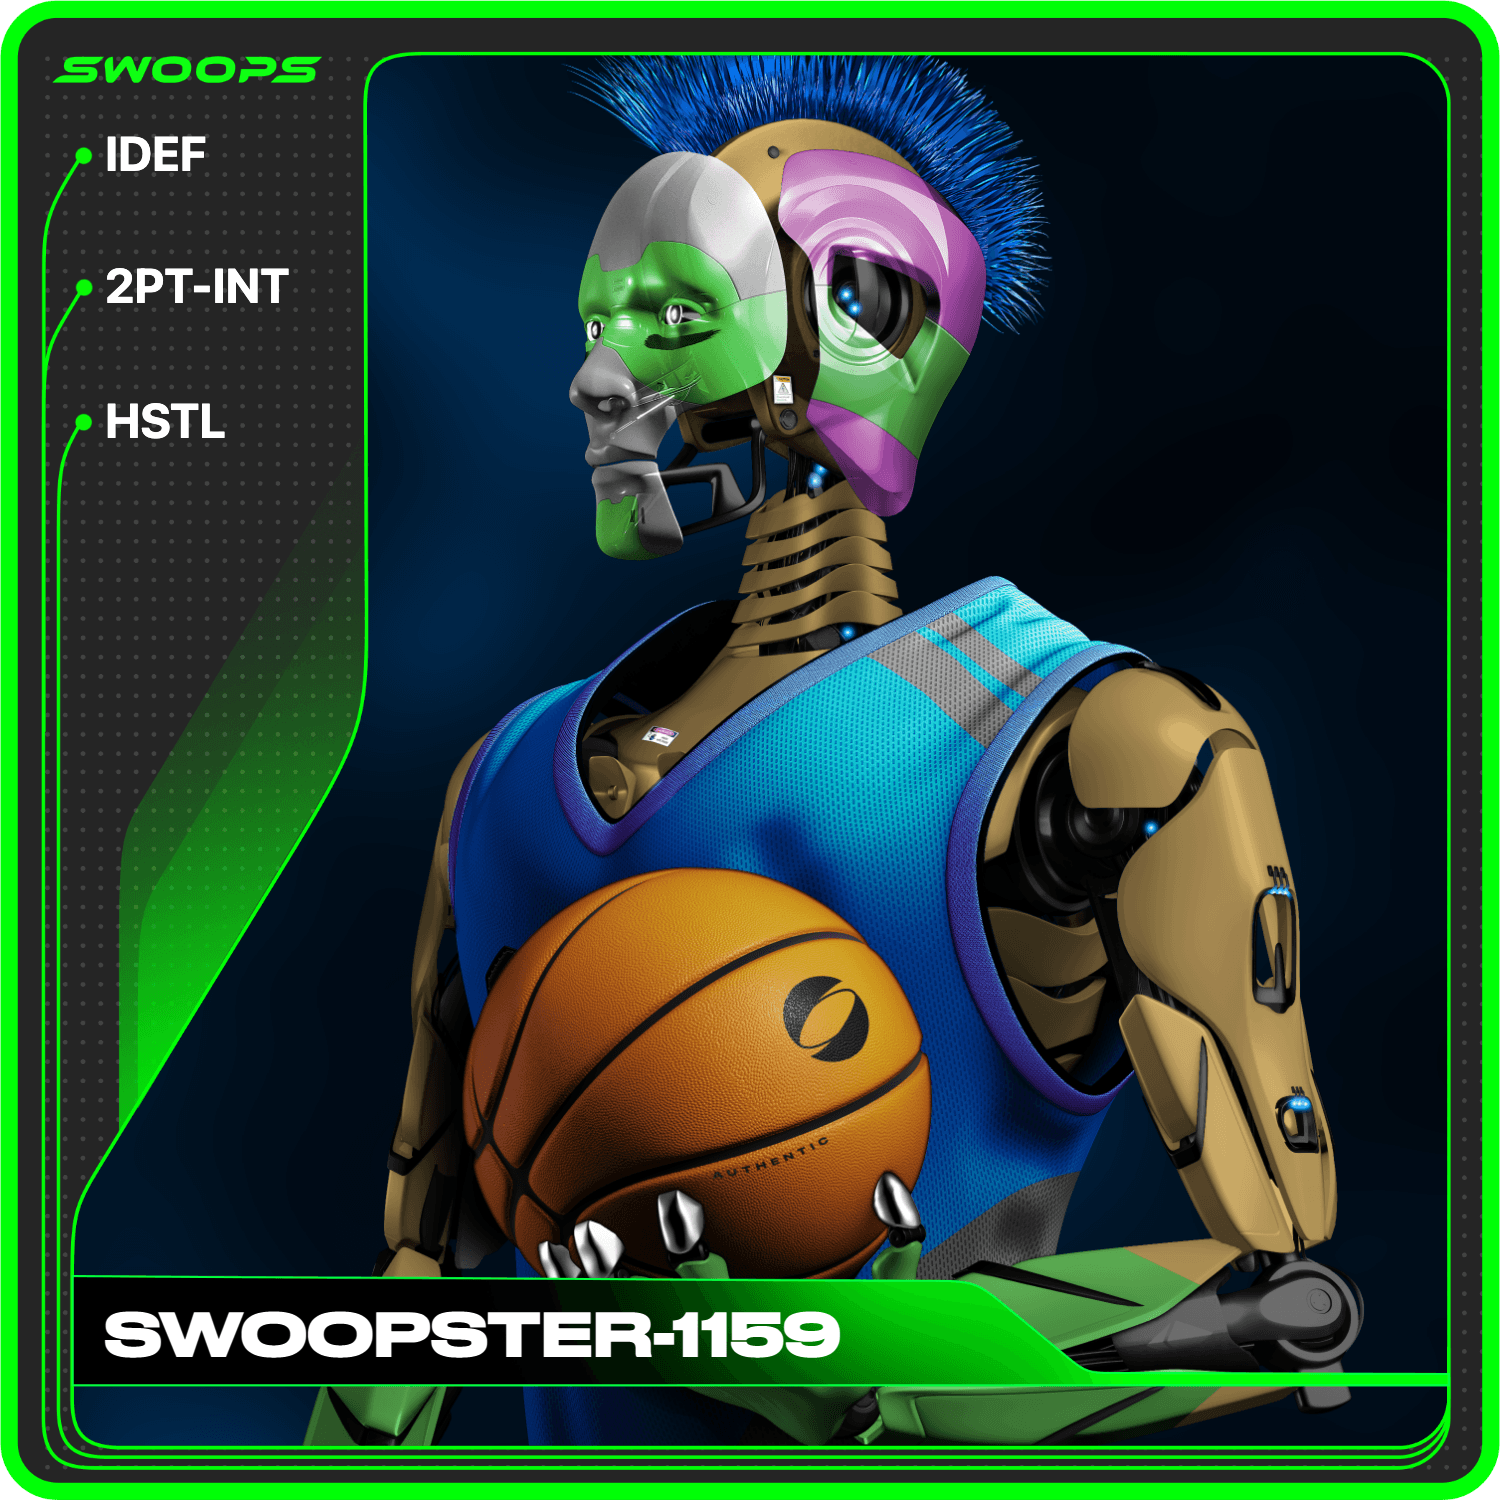 SWOOPSTER-1159